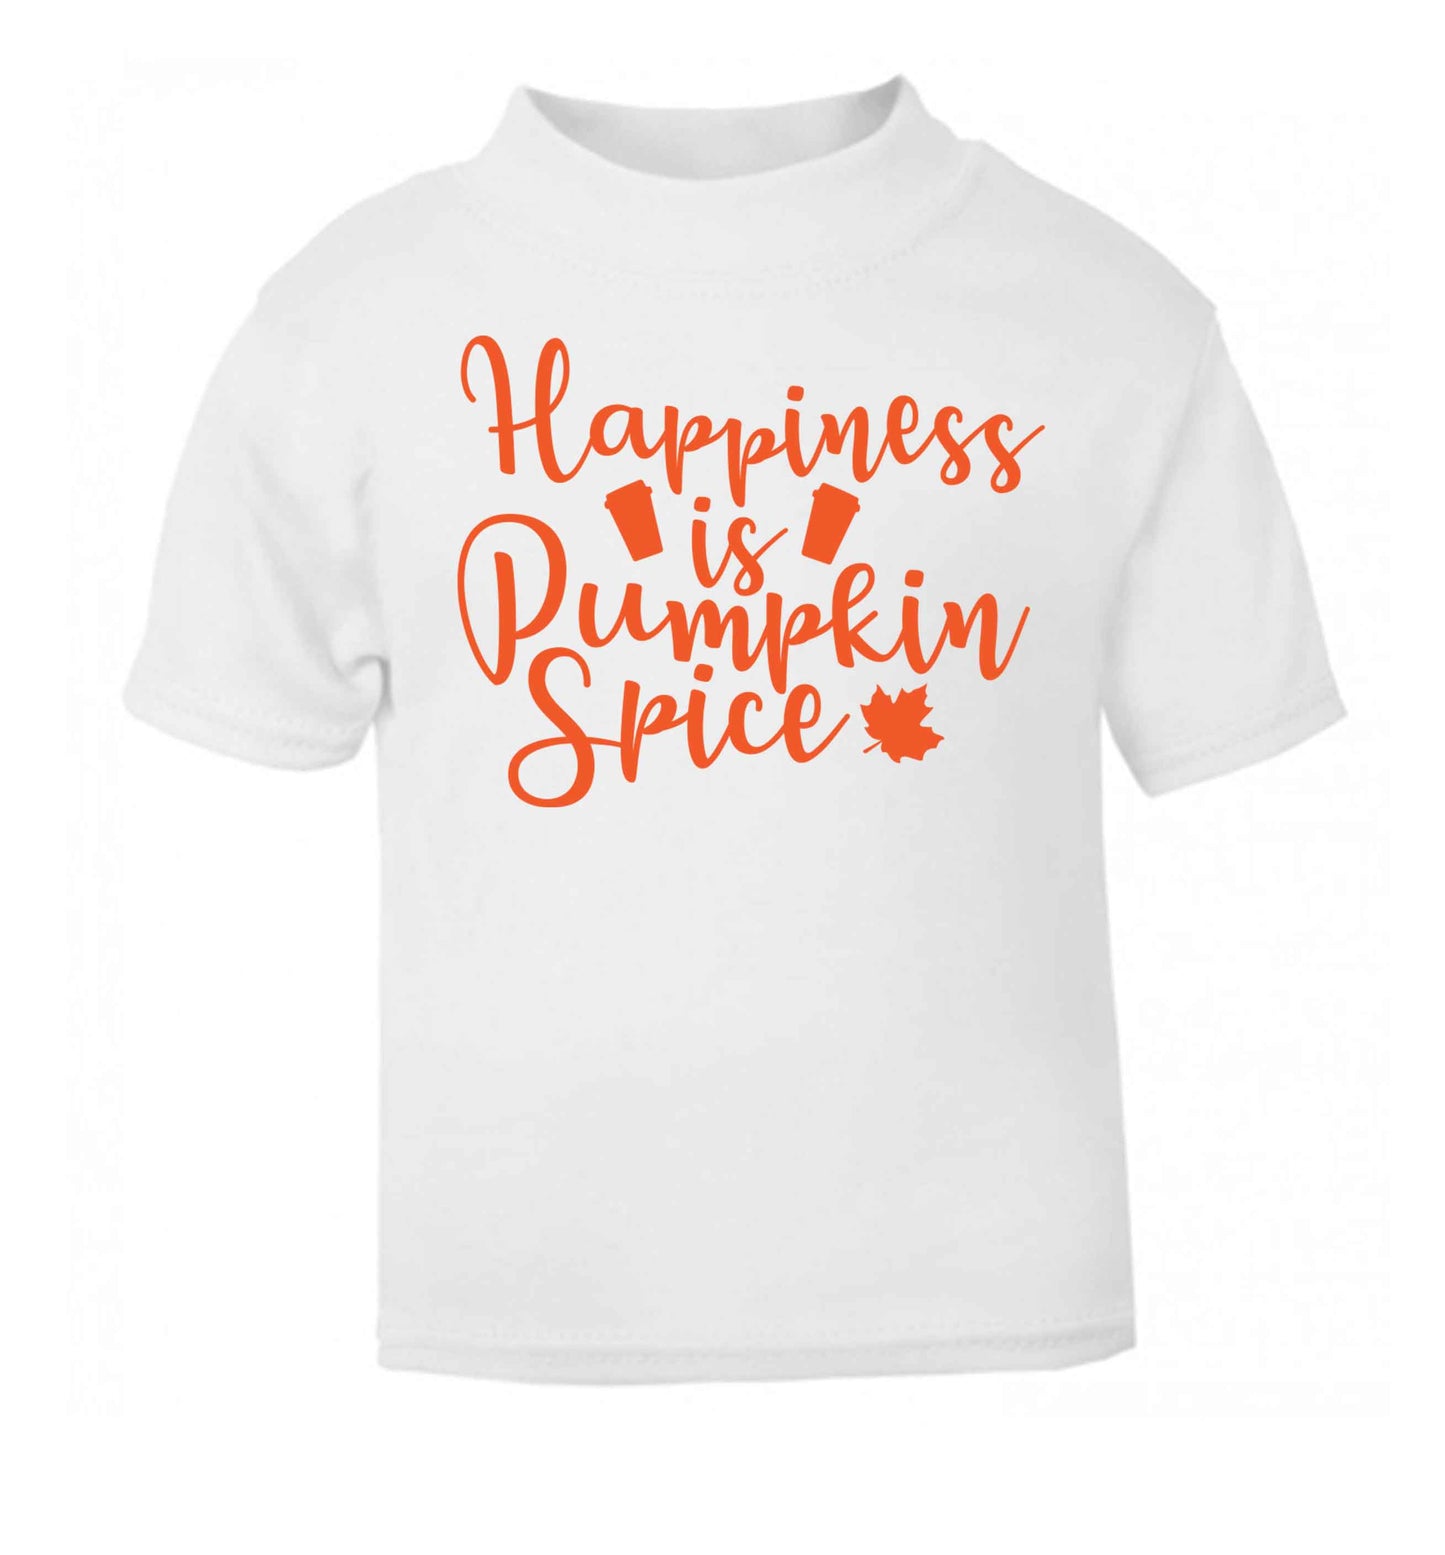 Happiness Pumpkin Spice white baby toddler Tshirt 2 Years